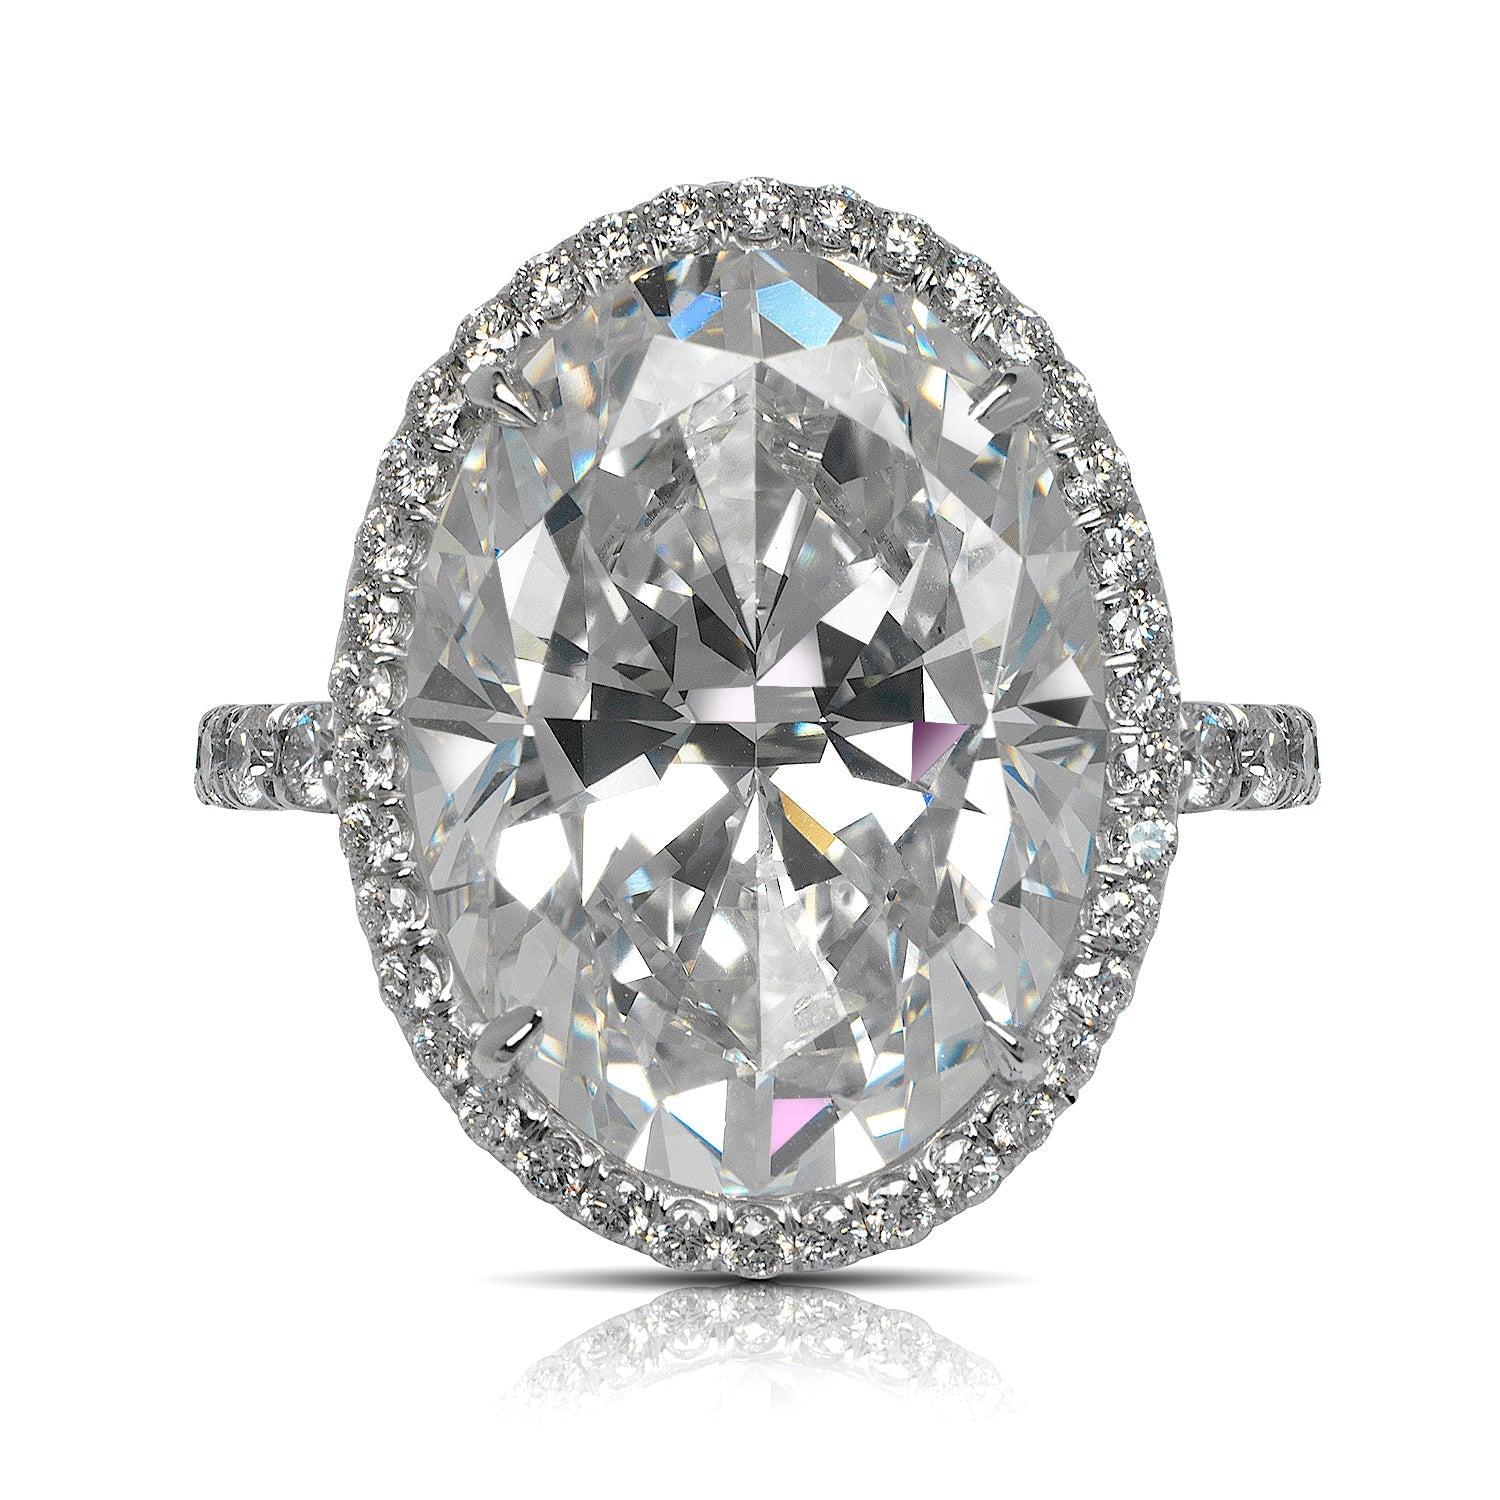 MACY OVAL HALO DIAMOND ENGAGEMENT RING PLATINUM BY MIKE NEKTA
GIA CERTIFIED

Center Diamond
Carat Weight: 10 Carats
Color :  F*
Clarity: INTERNALLY FLAWLESS -IF
Style:  OVAL BRILLIANT
Measurements:  16.8 x 12.4 x 7.5 mm
* This diamond has been